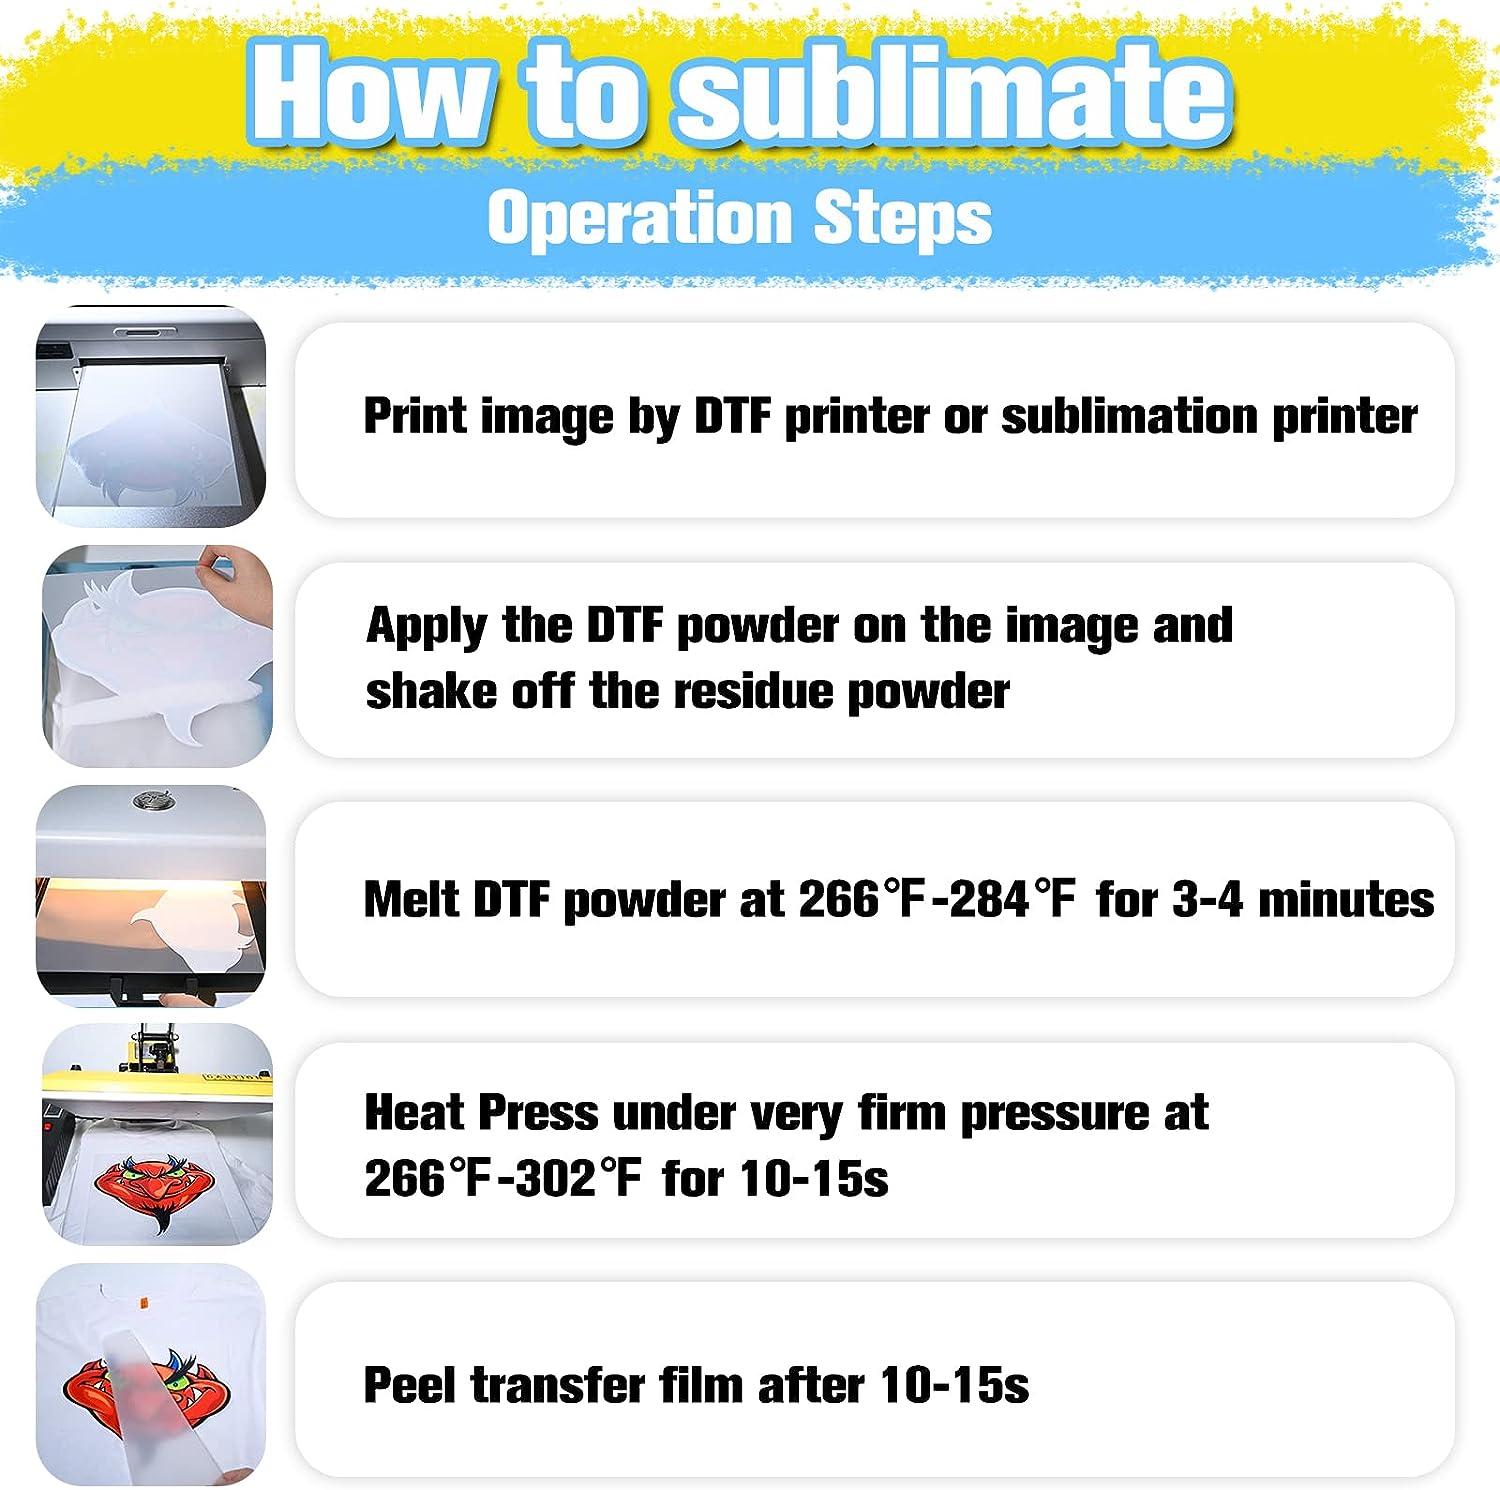 SUBLIMATION ON COTTON WITH DTF POWDER HACK